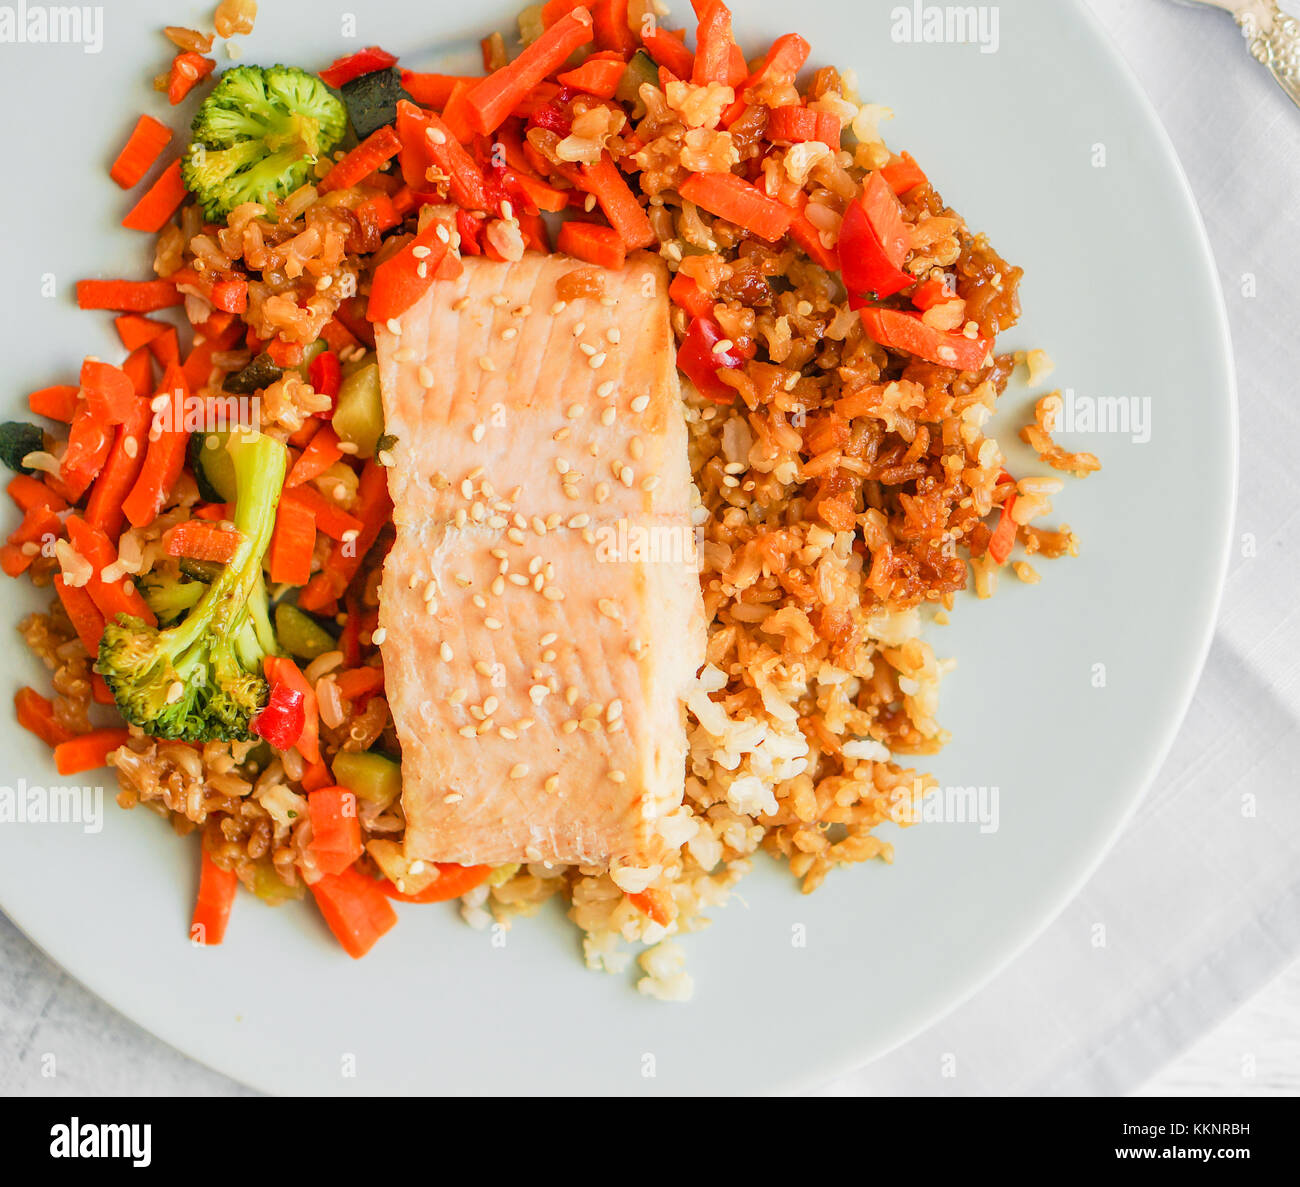 Grilled Salmon With Quinoa And Vegetables Stock Photo